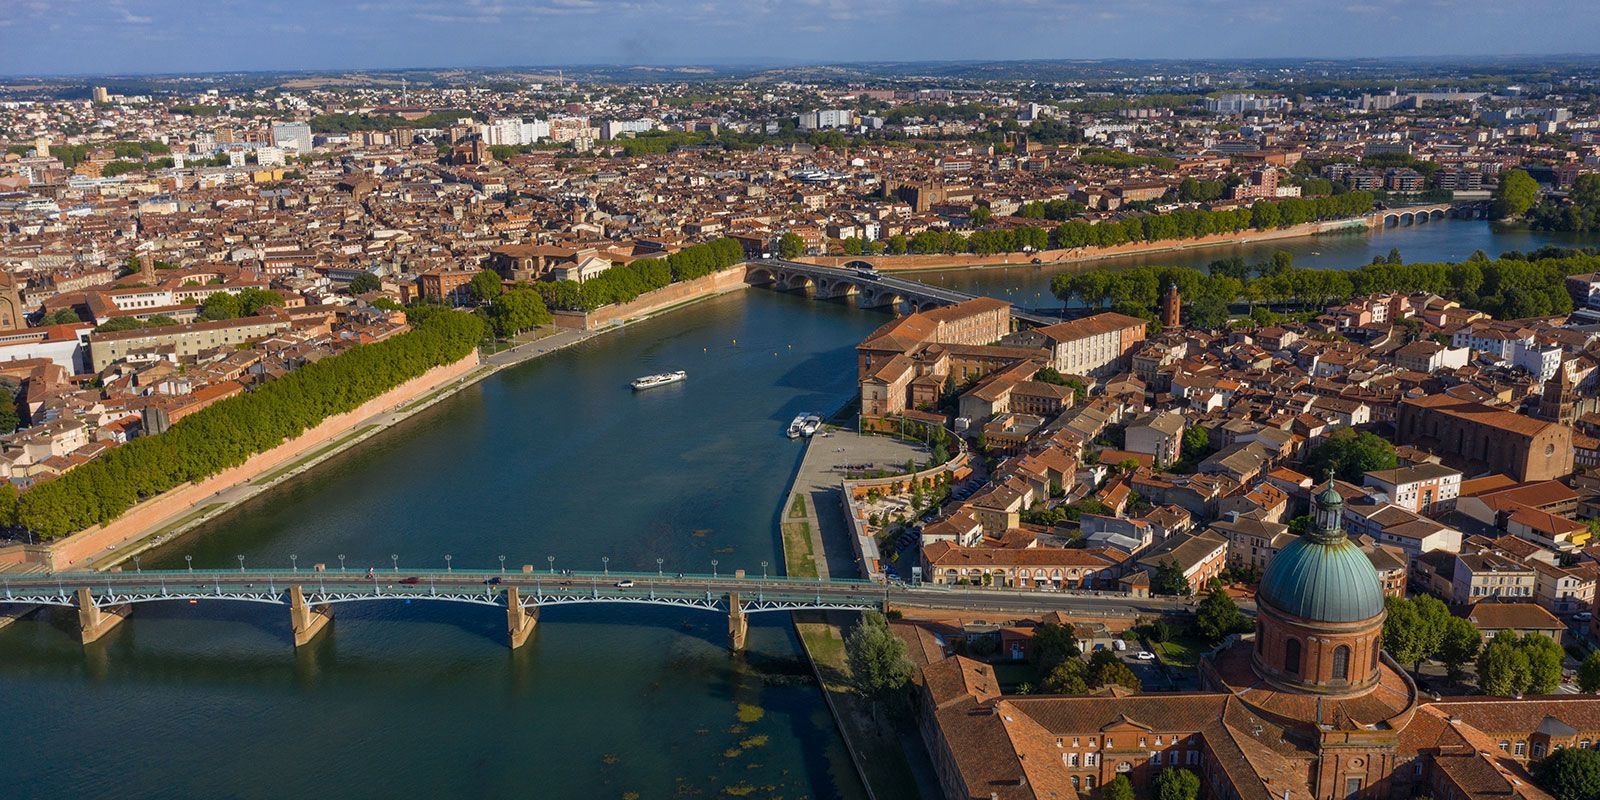 Toulouse, the Haute-Garonne in “Capitole” letters